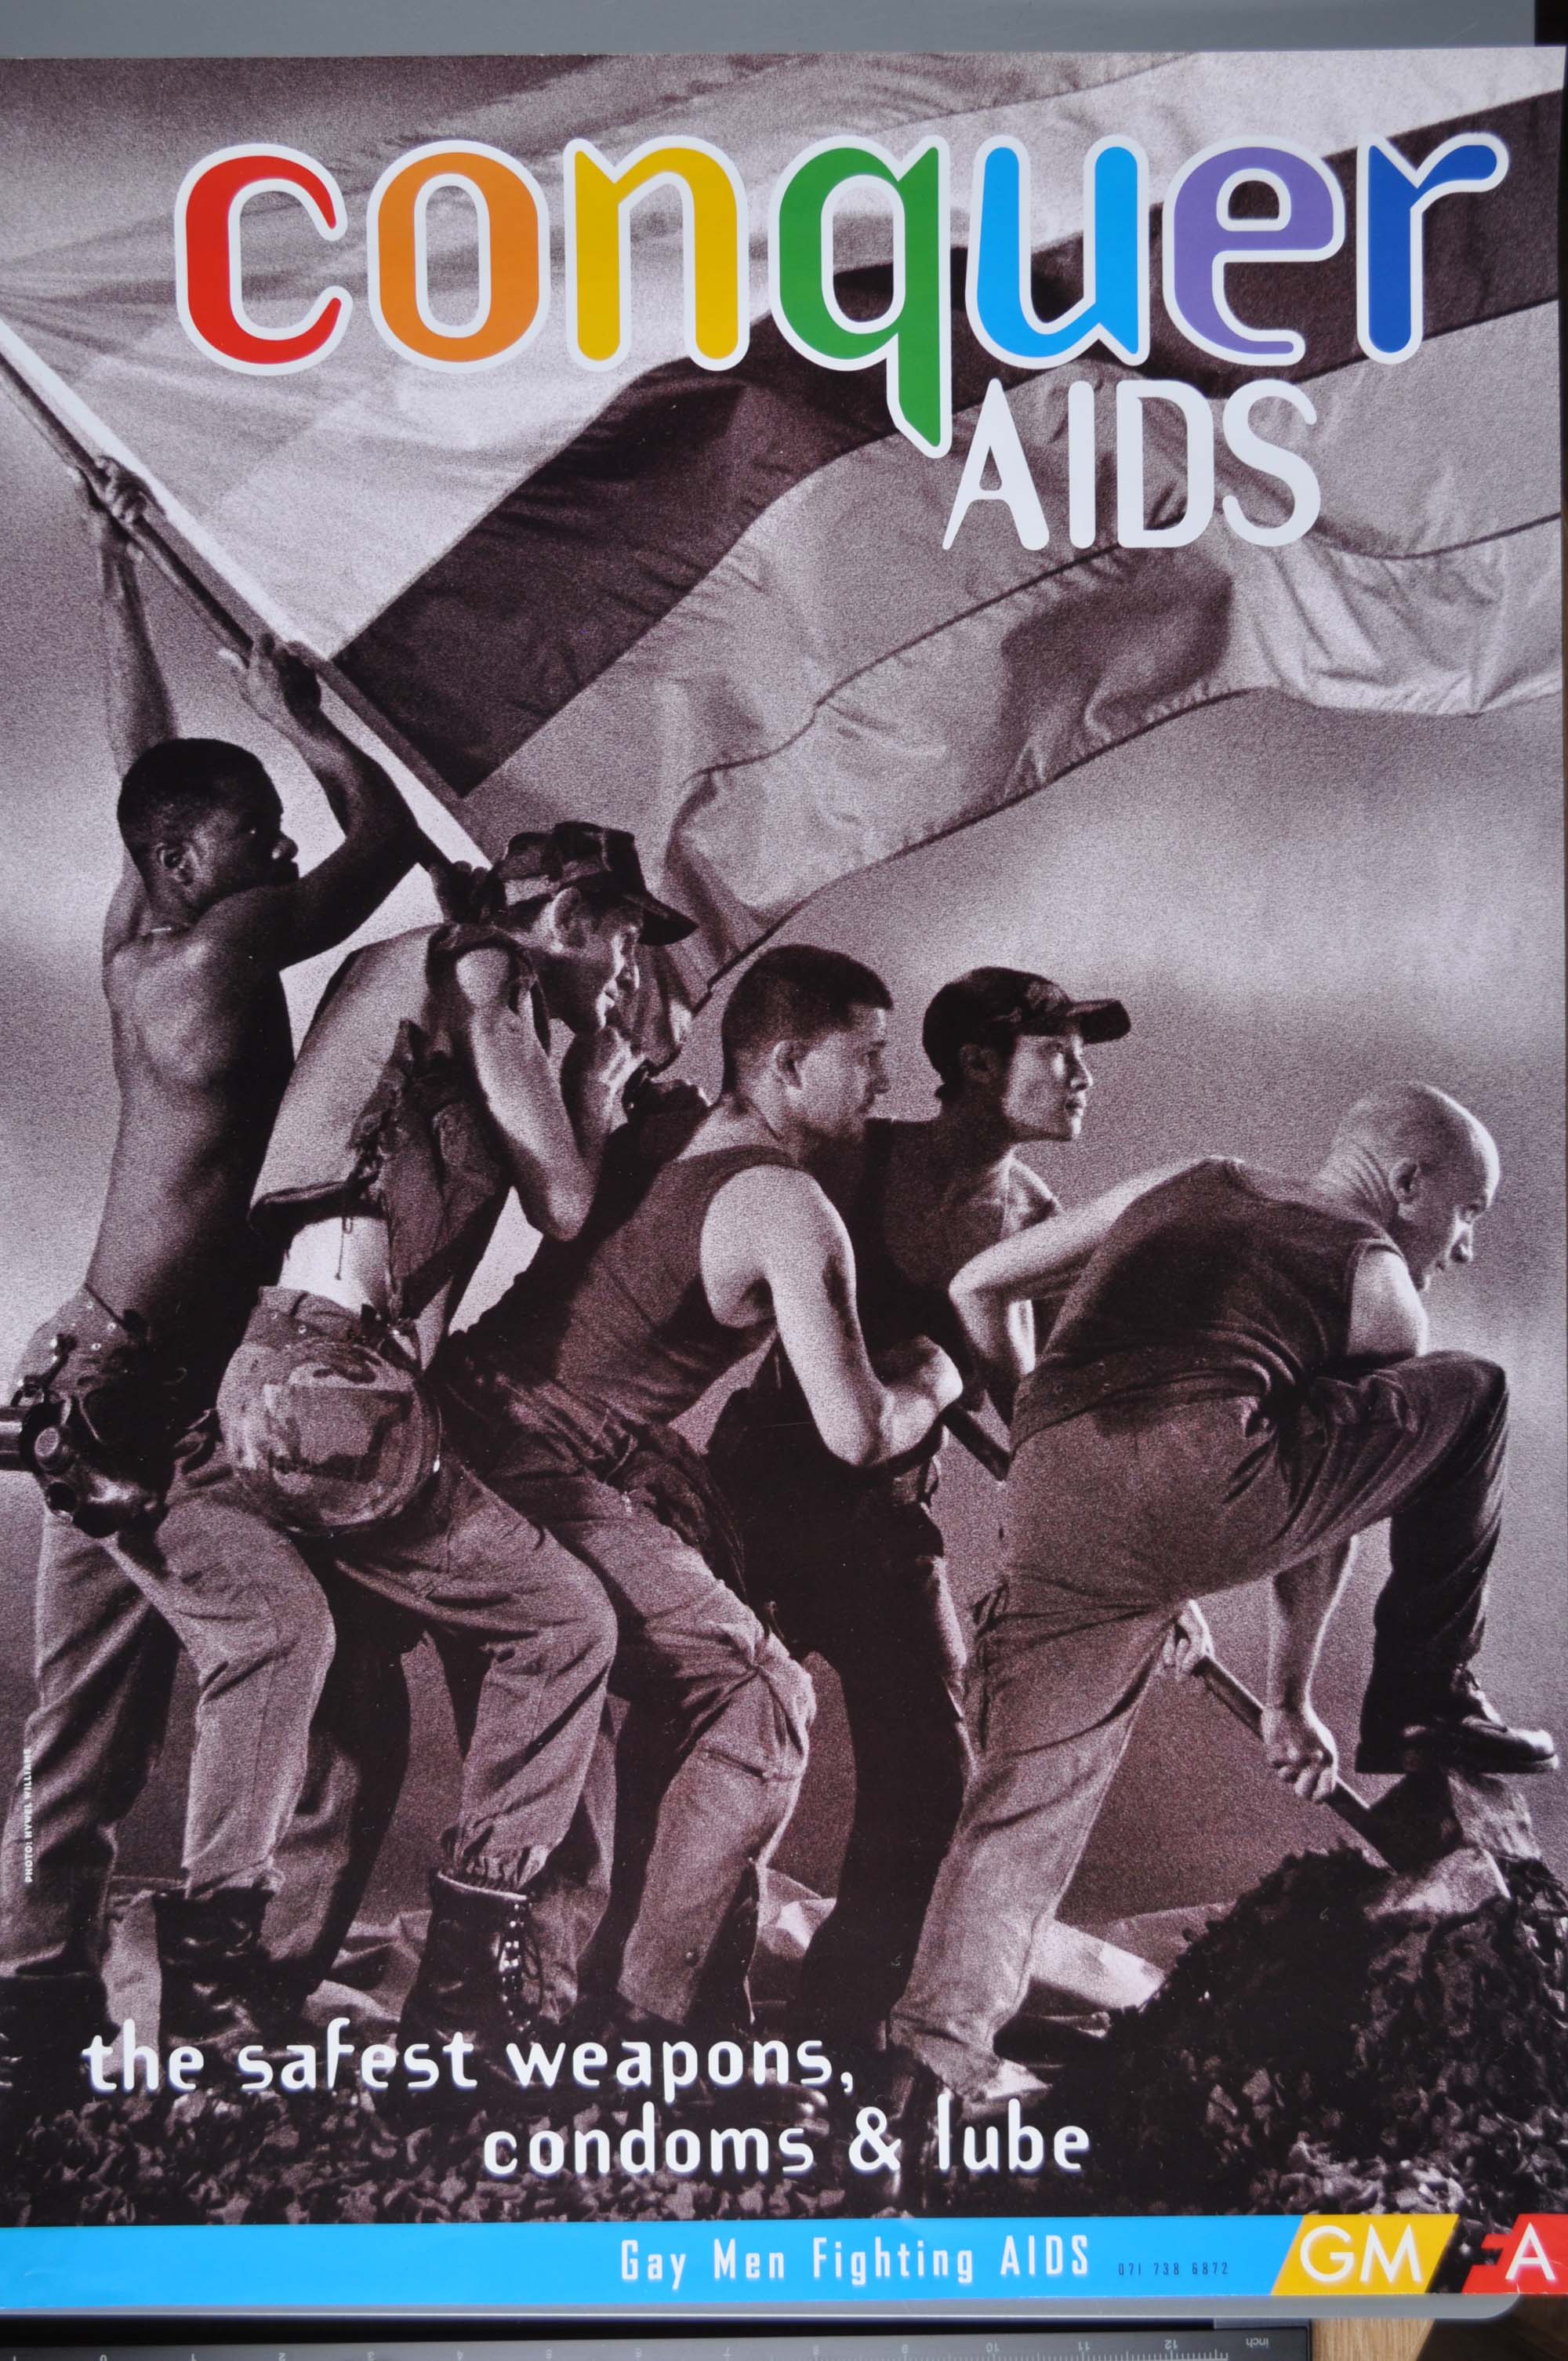 “Conquer AIDS” awareness poster from about 1995, by Gay Men Fighting AIDS (GMFA) - LGBT HERO